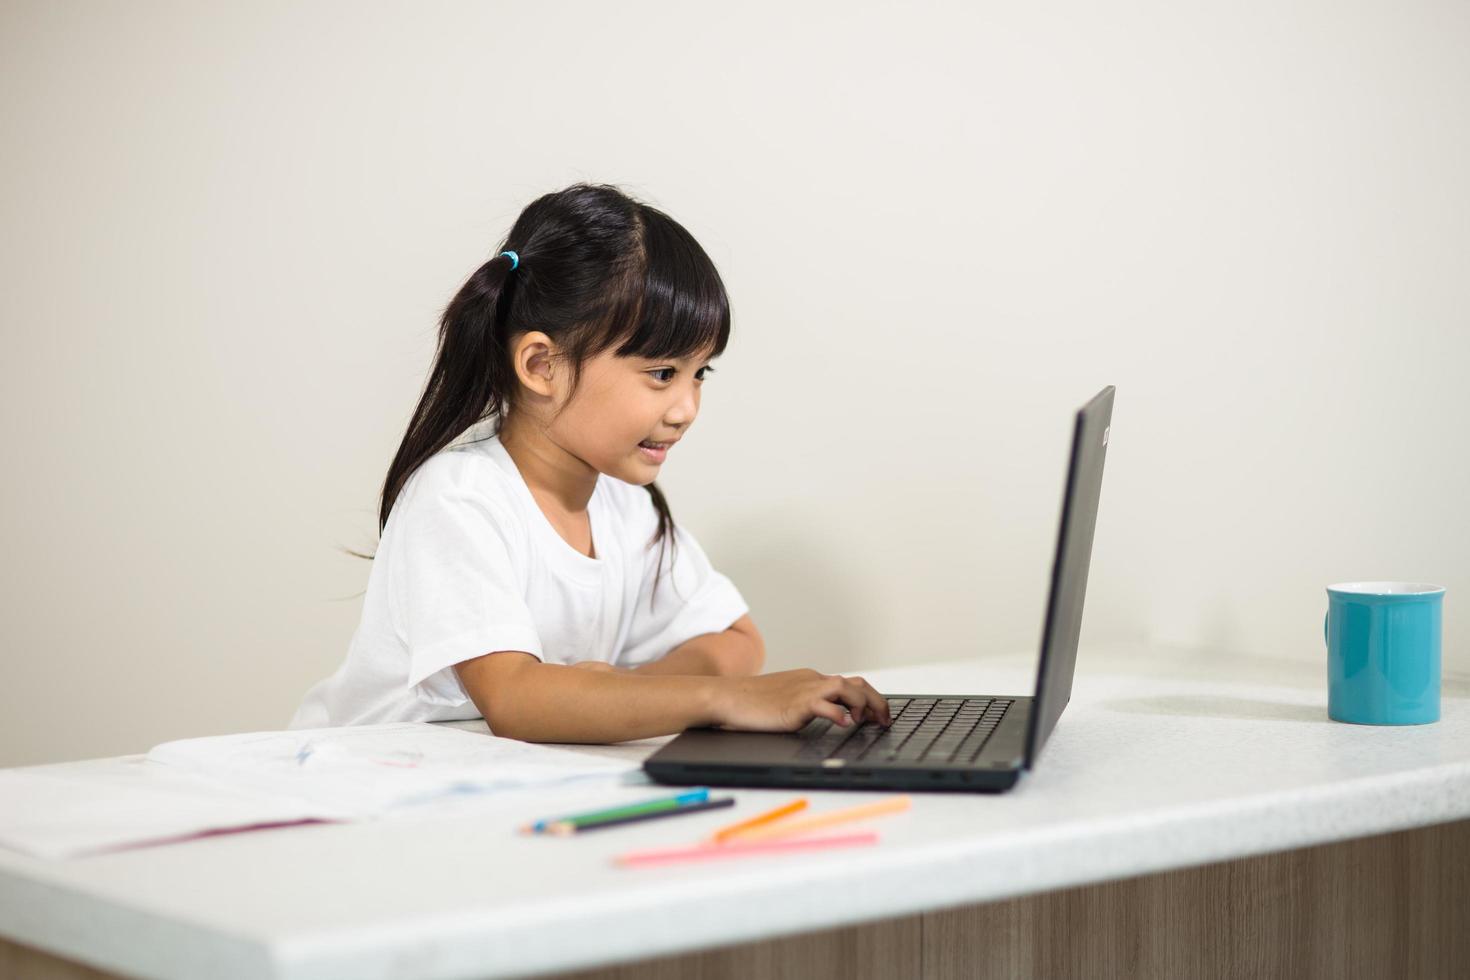 Coronavirus Outbreak. Lockdown and school closures. Schoolgirl watching online education class, happy talking with teacher on the internet at home. COVID-19 pandemic forces children online learning photo